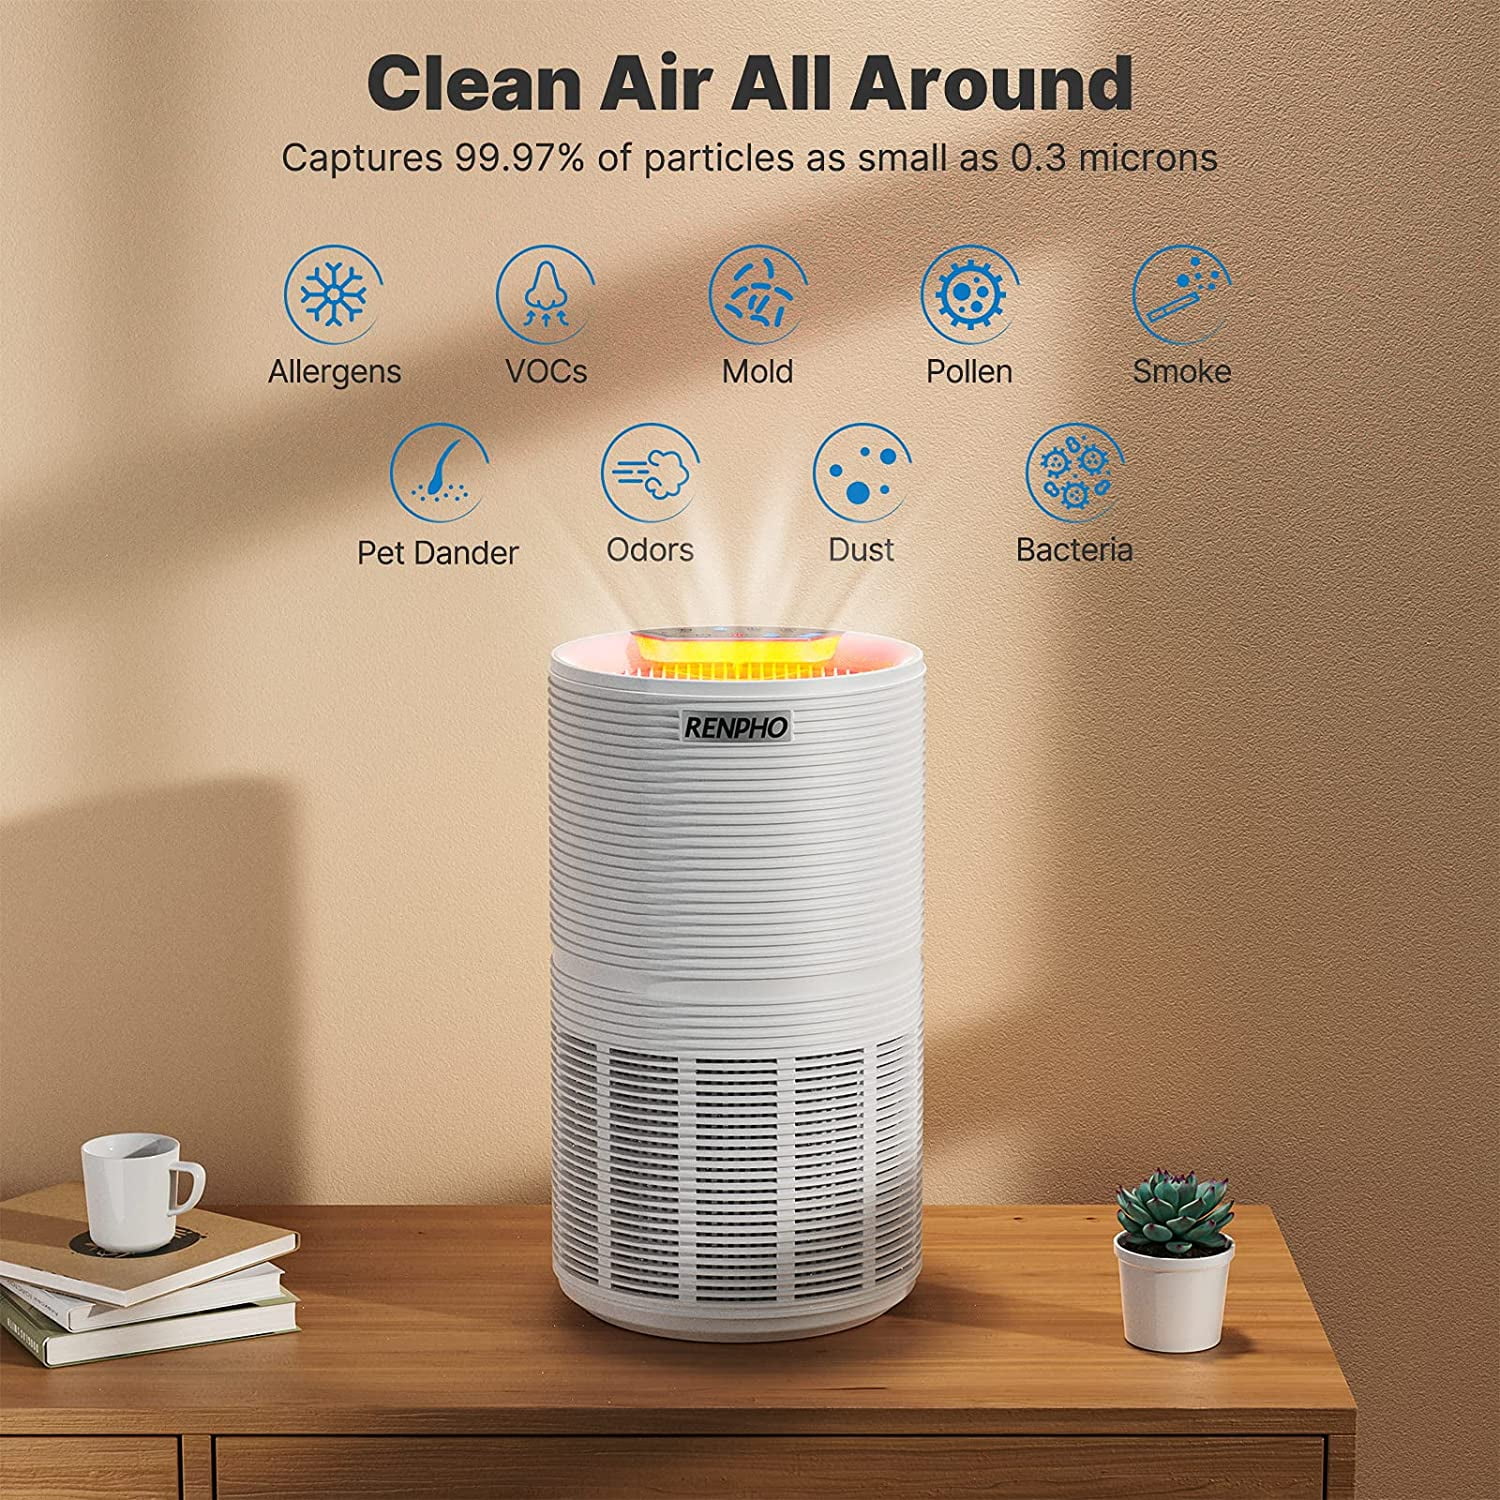 RENPHO HEPA Air Purifier for Home Large Room up to 600 Sq.ft, H13 True HEPA  Filter Air Cleaner for Pet Hair, Allergies, 99.97% Smokers, Odors, Dust